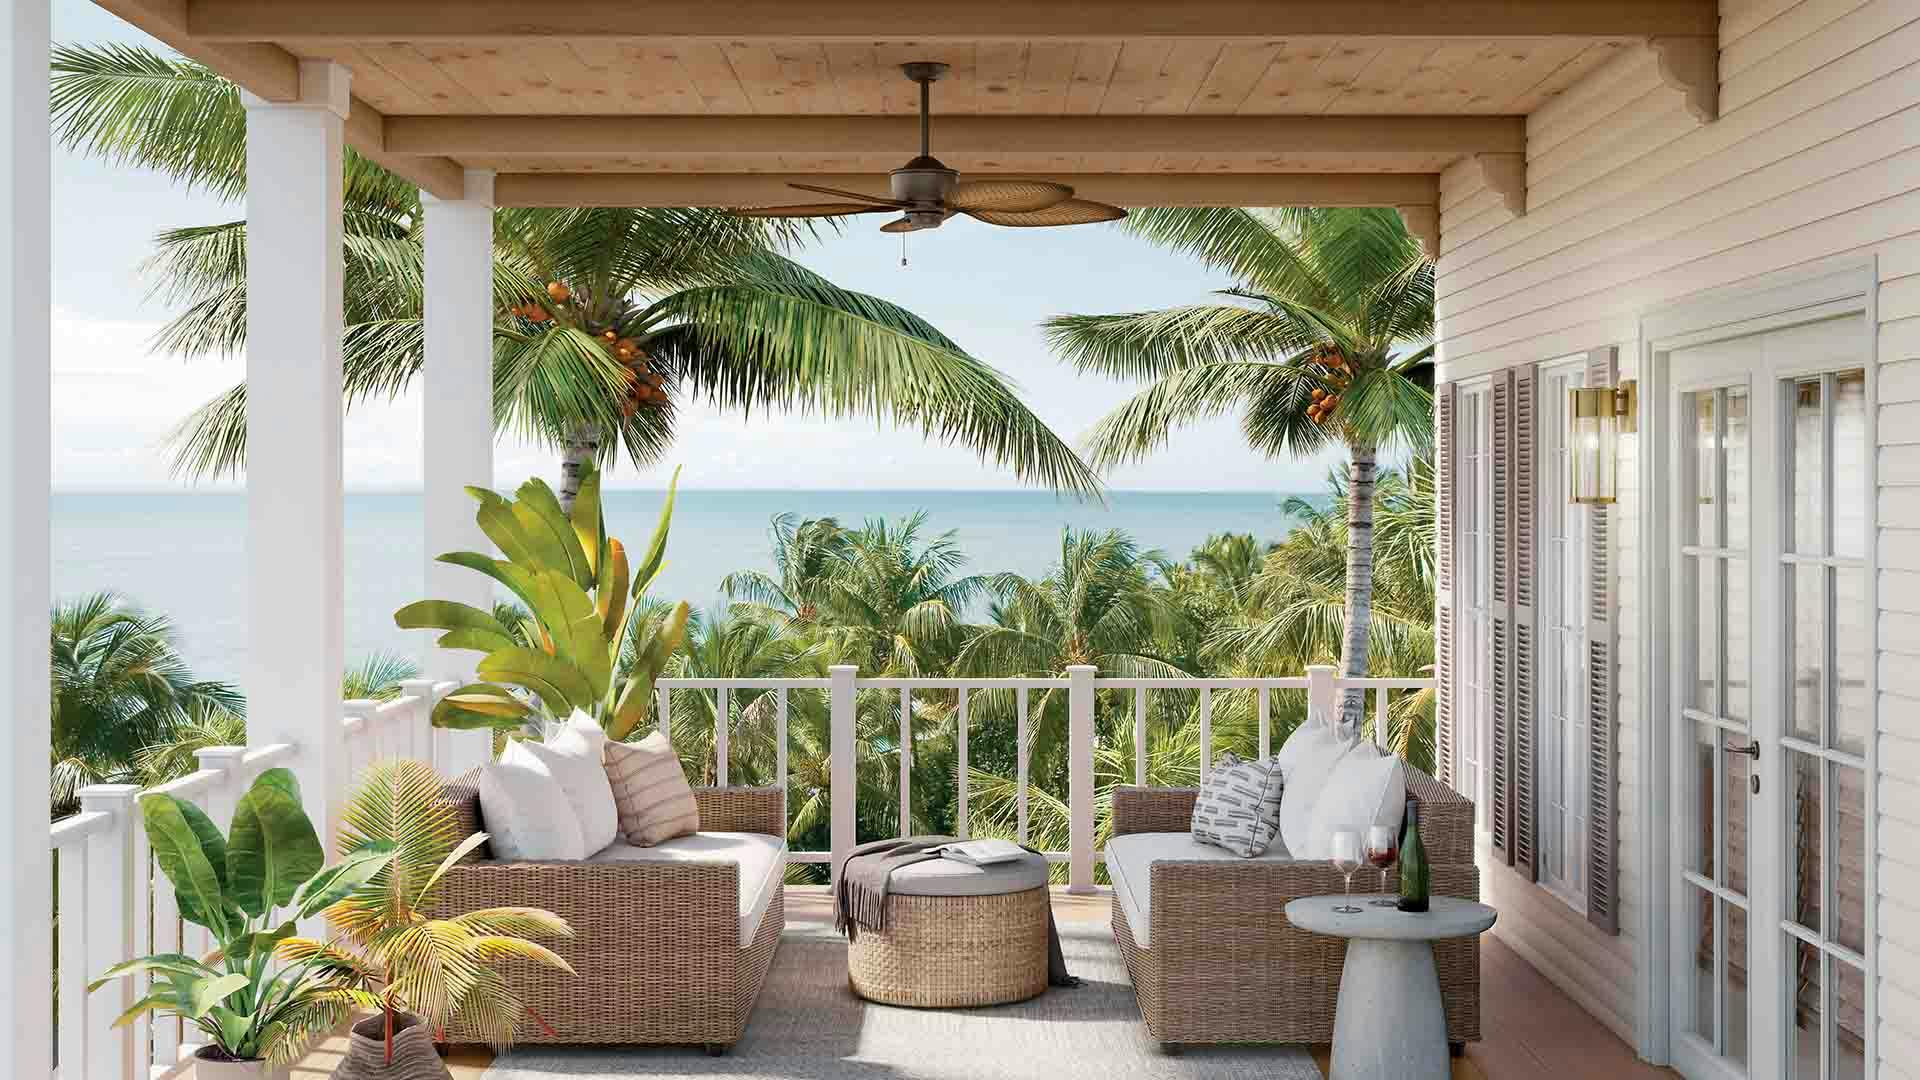 Nani ceiling fan in satin natural bronze on patio with ocean and palm trees in the background.